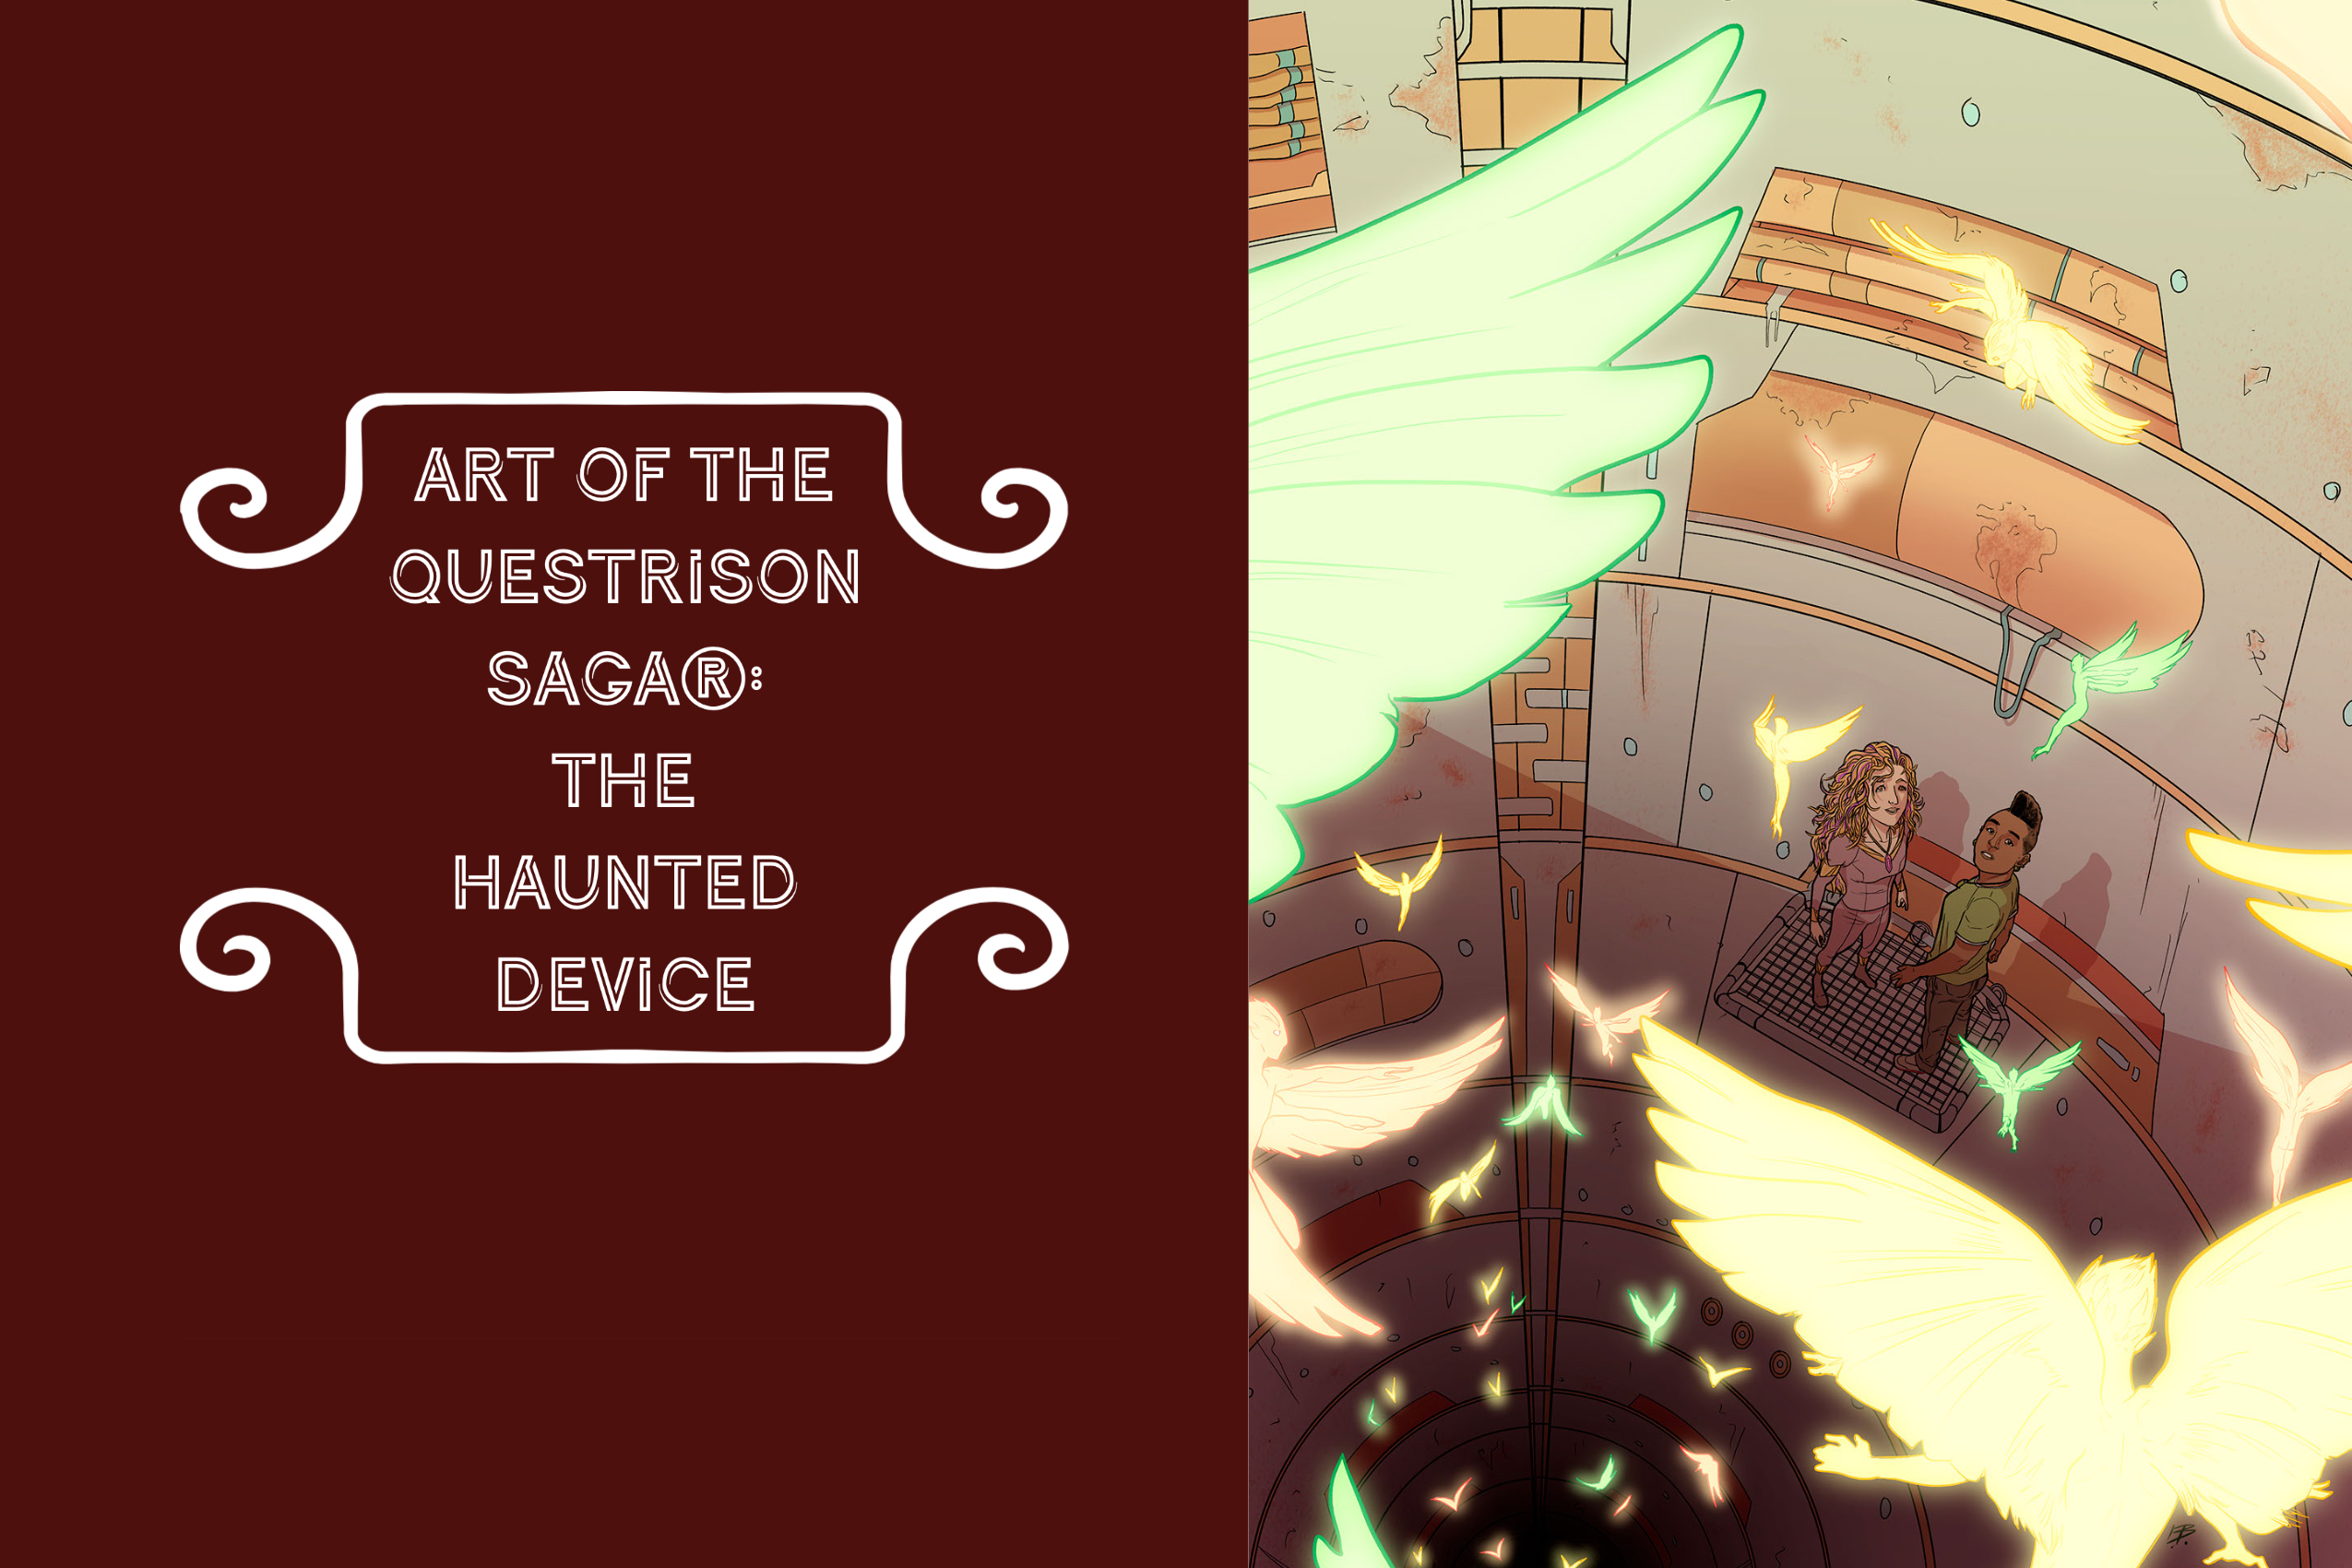 Art of The Questrison Saga®: The Haunted Device